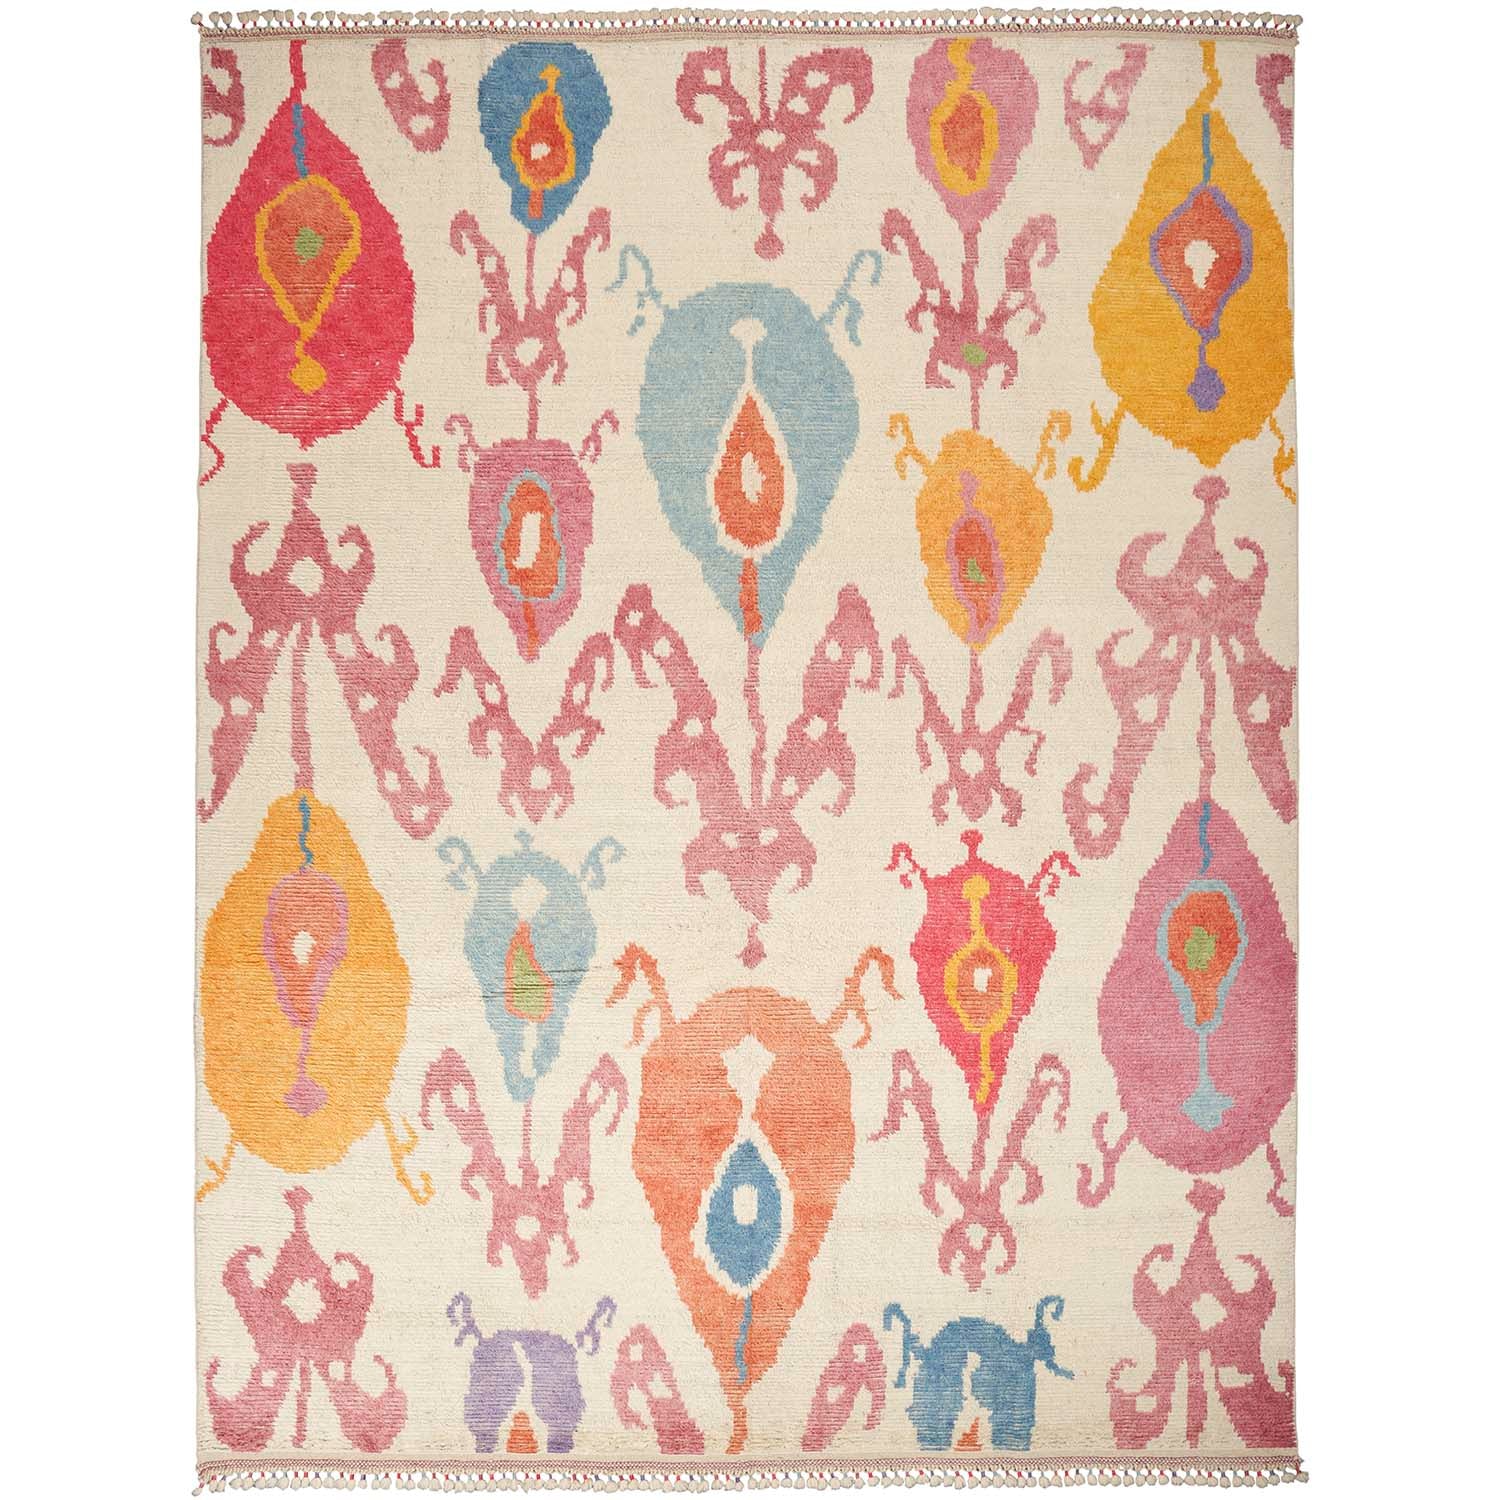 Exquisite handmade rug with intricate floral motifs in vibrant colors.